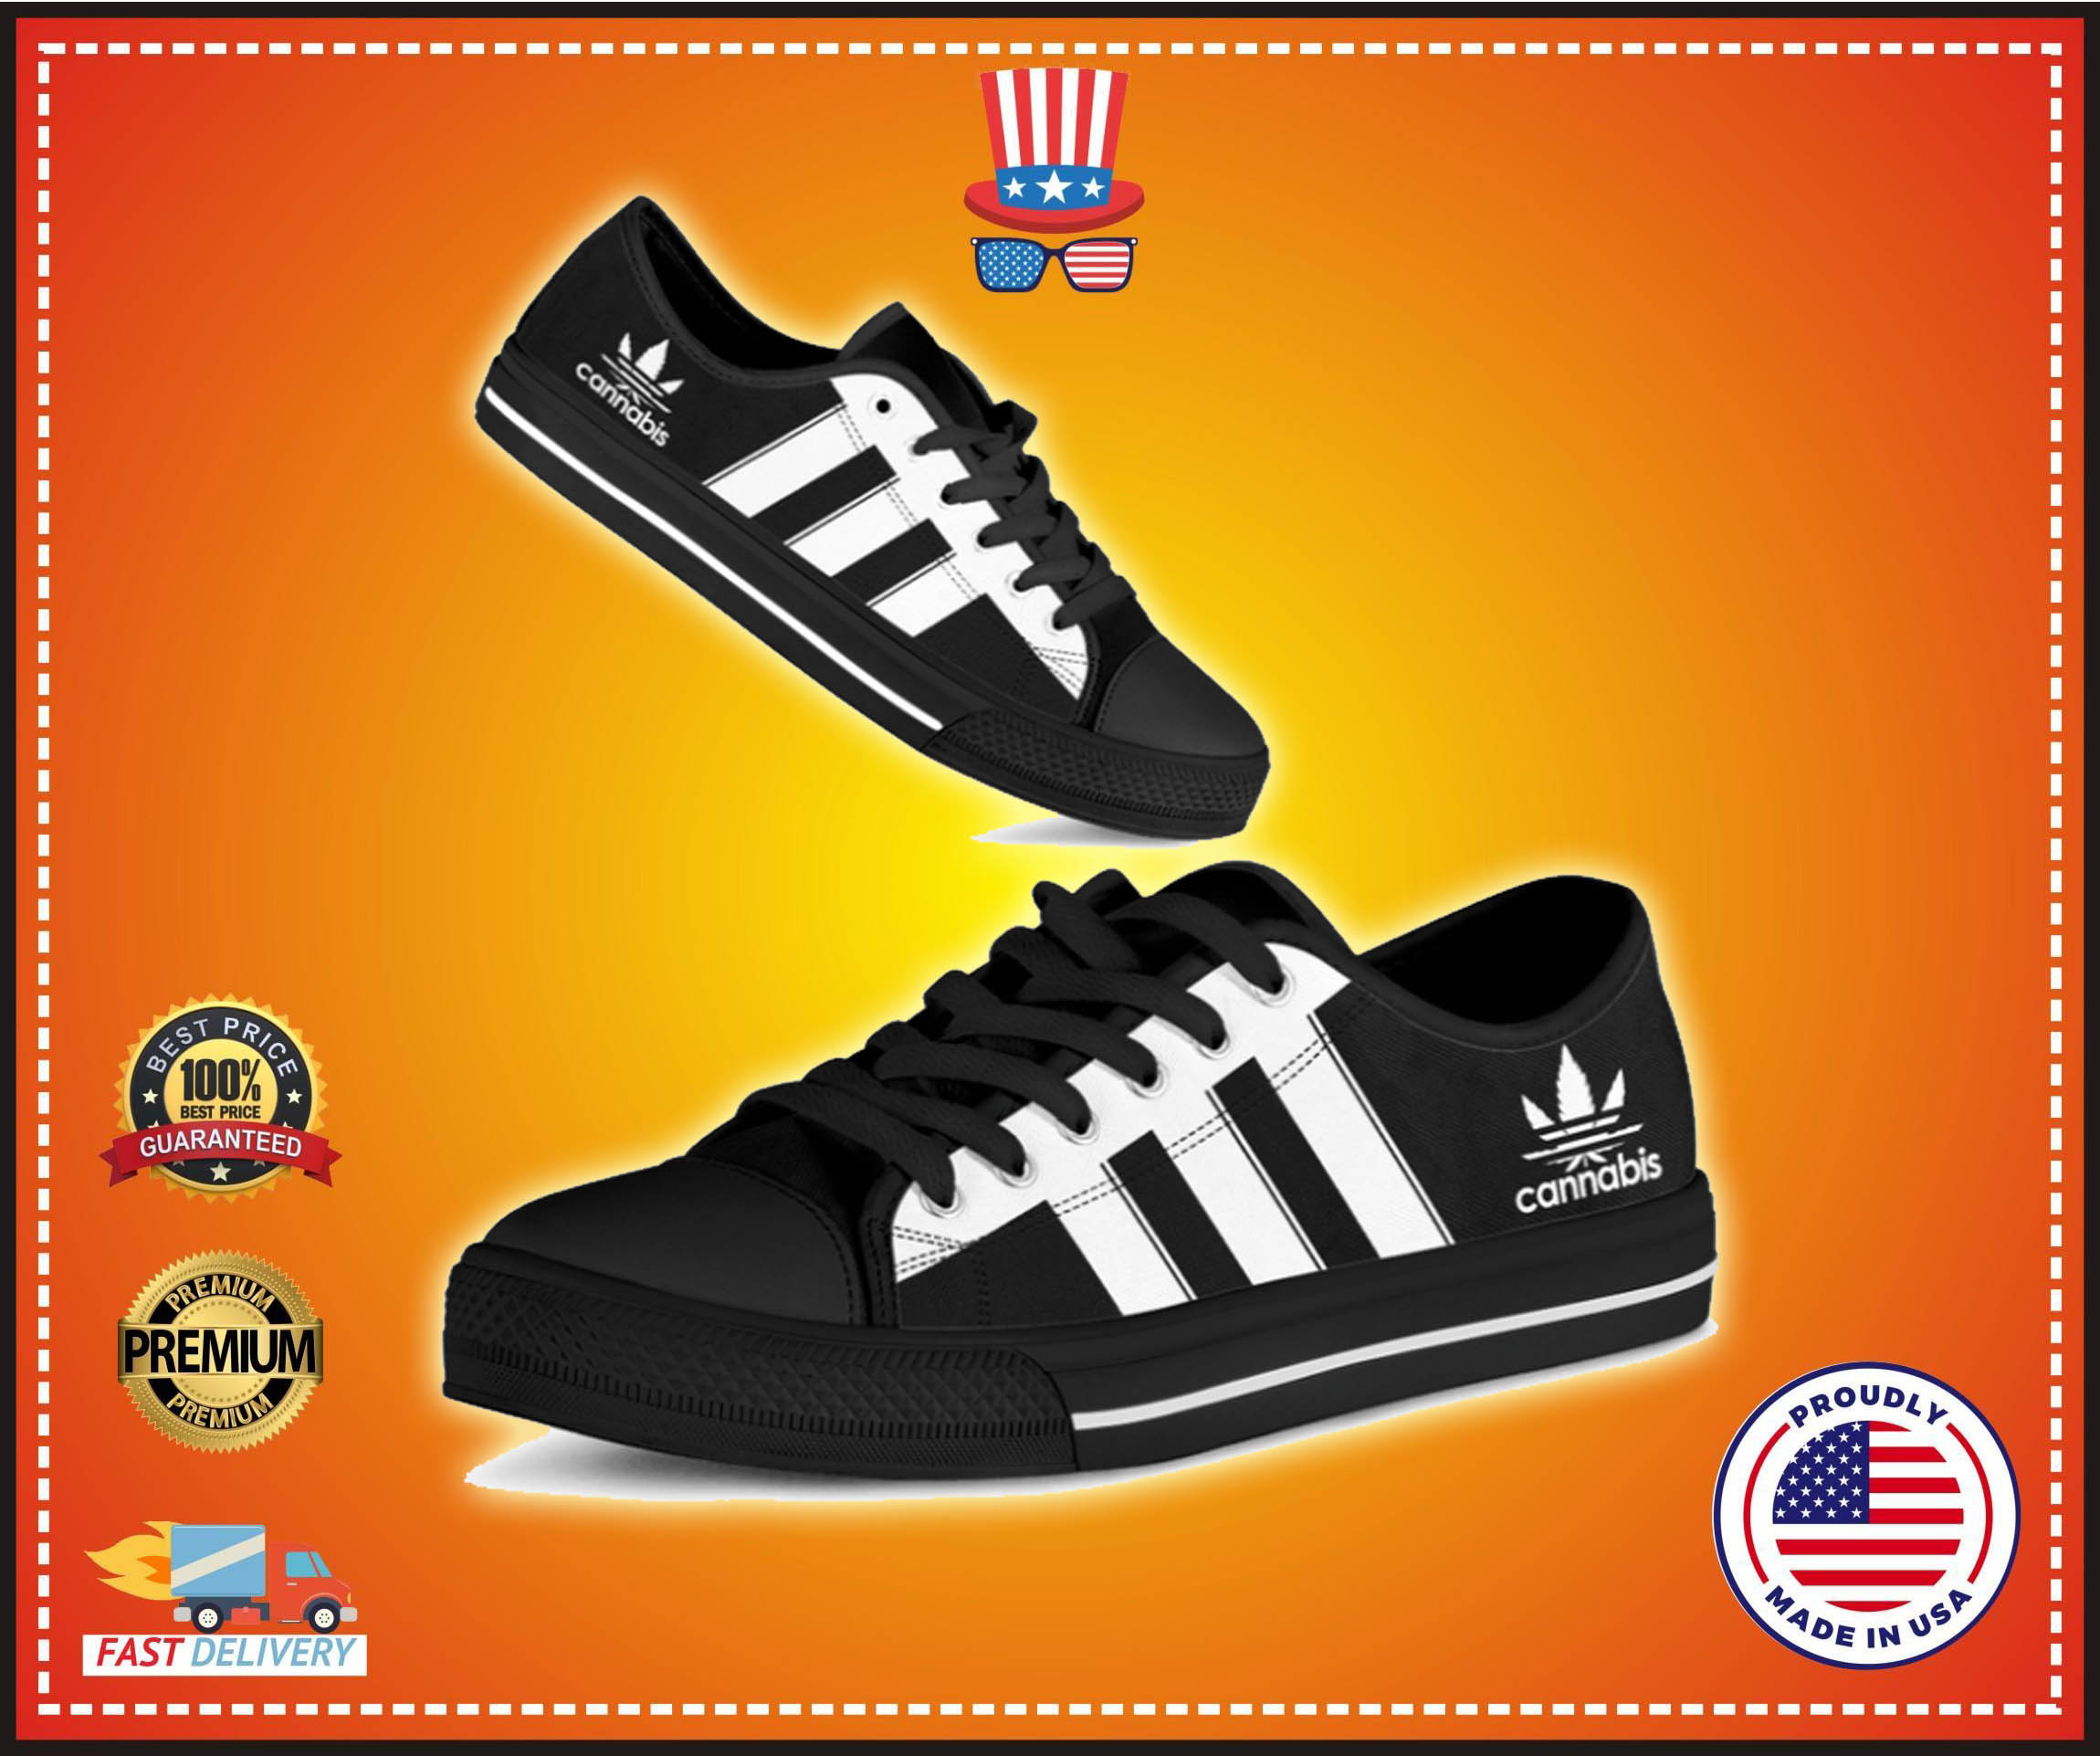 Adidas cannabis low top shoes 2